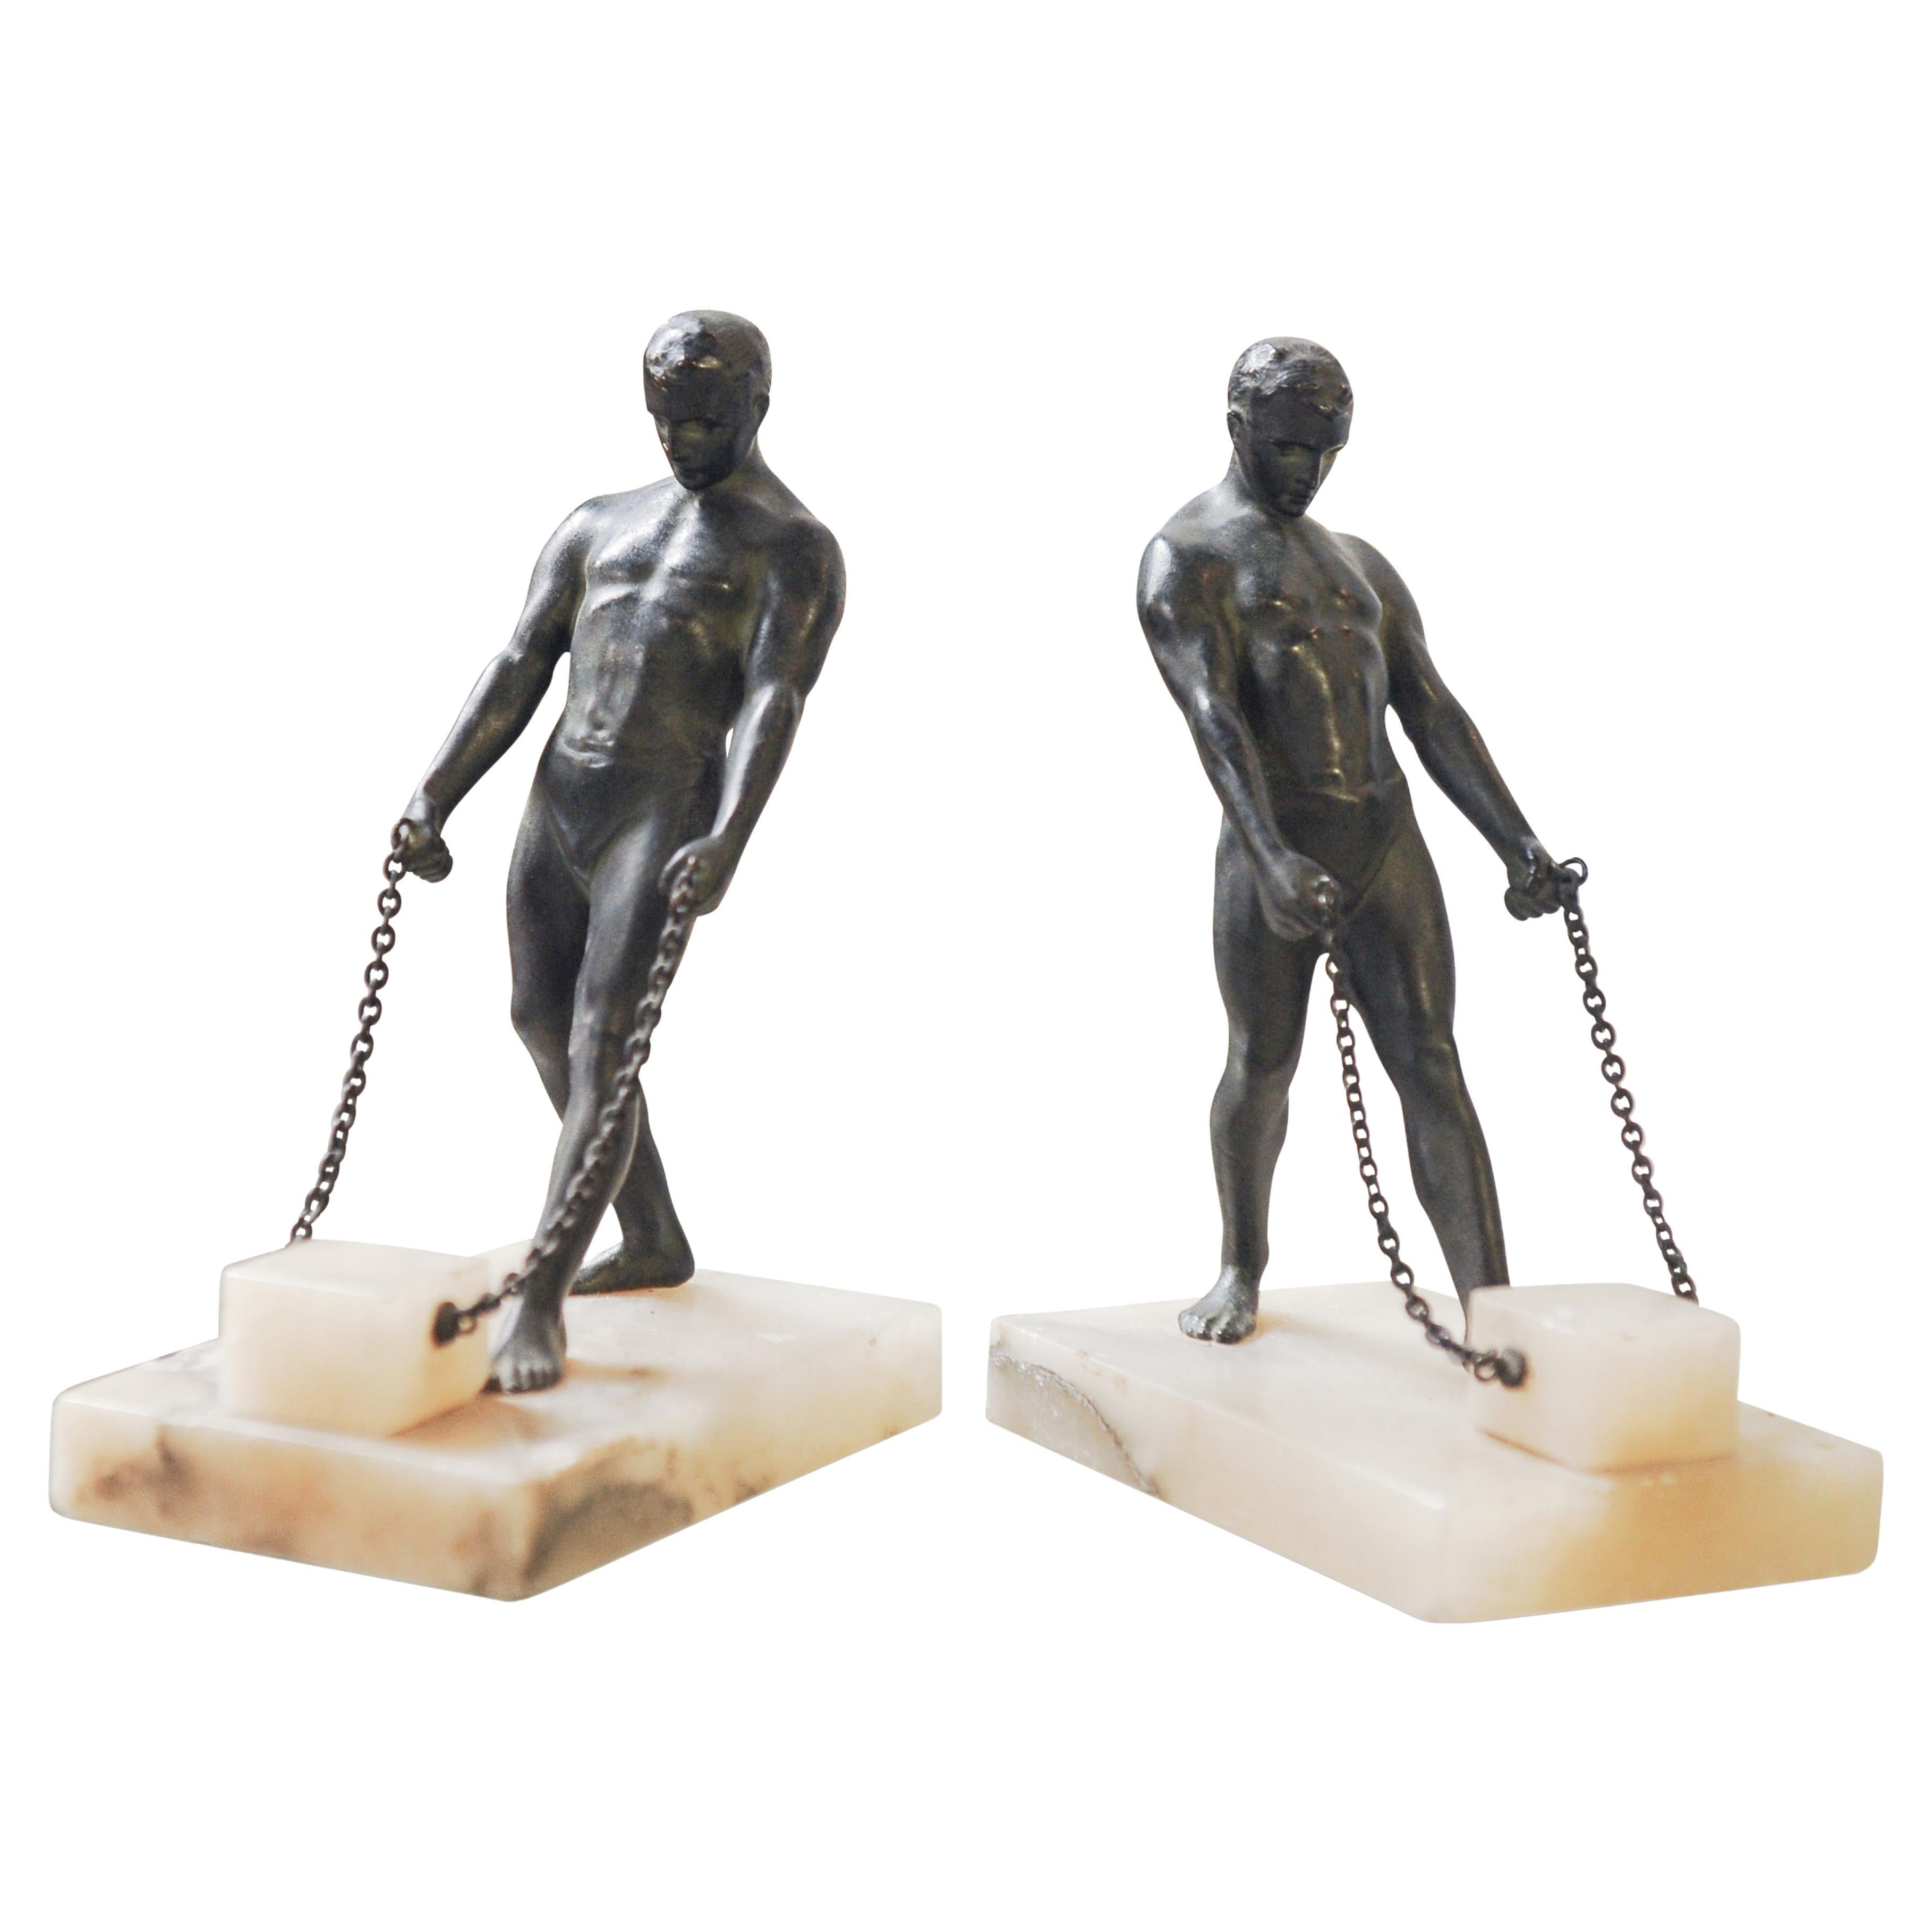  Matching Pair Grand Tour Bronze Greco Male Figurine Bookends On Alabaster Base  For Sale